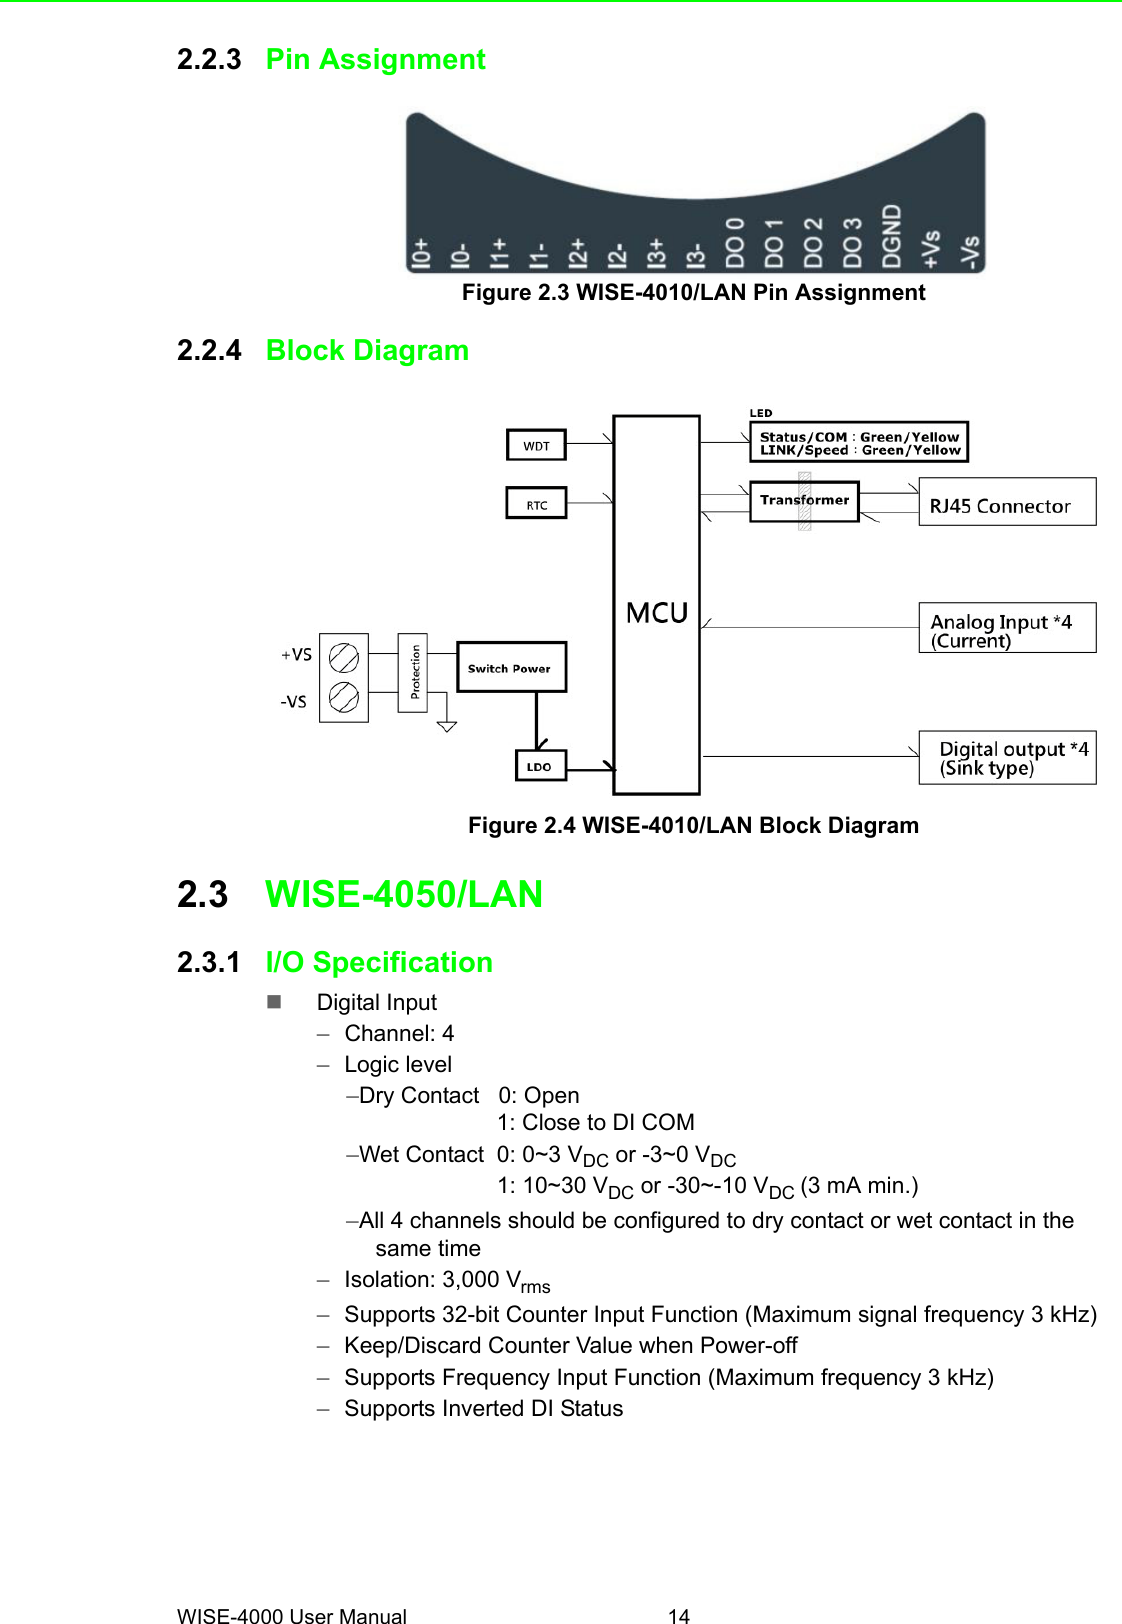 WISE-4000 User Manual 142.2.3 Pin AssignmentFigure 2.3 WISE-4010/LAN Pin Assignment2.2.4 Block DiagramFigure 2.4 WISE-4010/LAN Block Diagram2.3 WISE-4050/LAN2.3.1 I/O SpecificationDigital Input–Channel: 4–Logic level–Dry Contact   0: Open                   1: Close to DI COM–Wet Contact  0: 0~3 VDC or -3~0 VDC                   1: 10~30 VDC or -30~-10 VDC (3 mA min.)–All 4 channels should be configured to dry contact or wet contact in the same time–Isolation: 3,000 Vrms–Supports 32-bit Counter Input Function (Maximum signal frequency 3 kHz) –Keep/Discard Counter Value when Power-off –Supports Frequency Input Function (Maximum frequency 3 kHz)–Supports Inverted DI Status